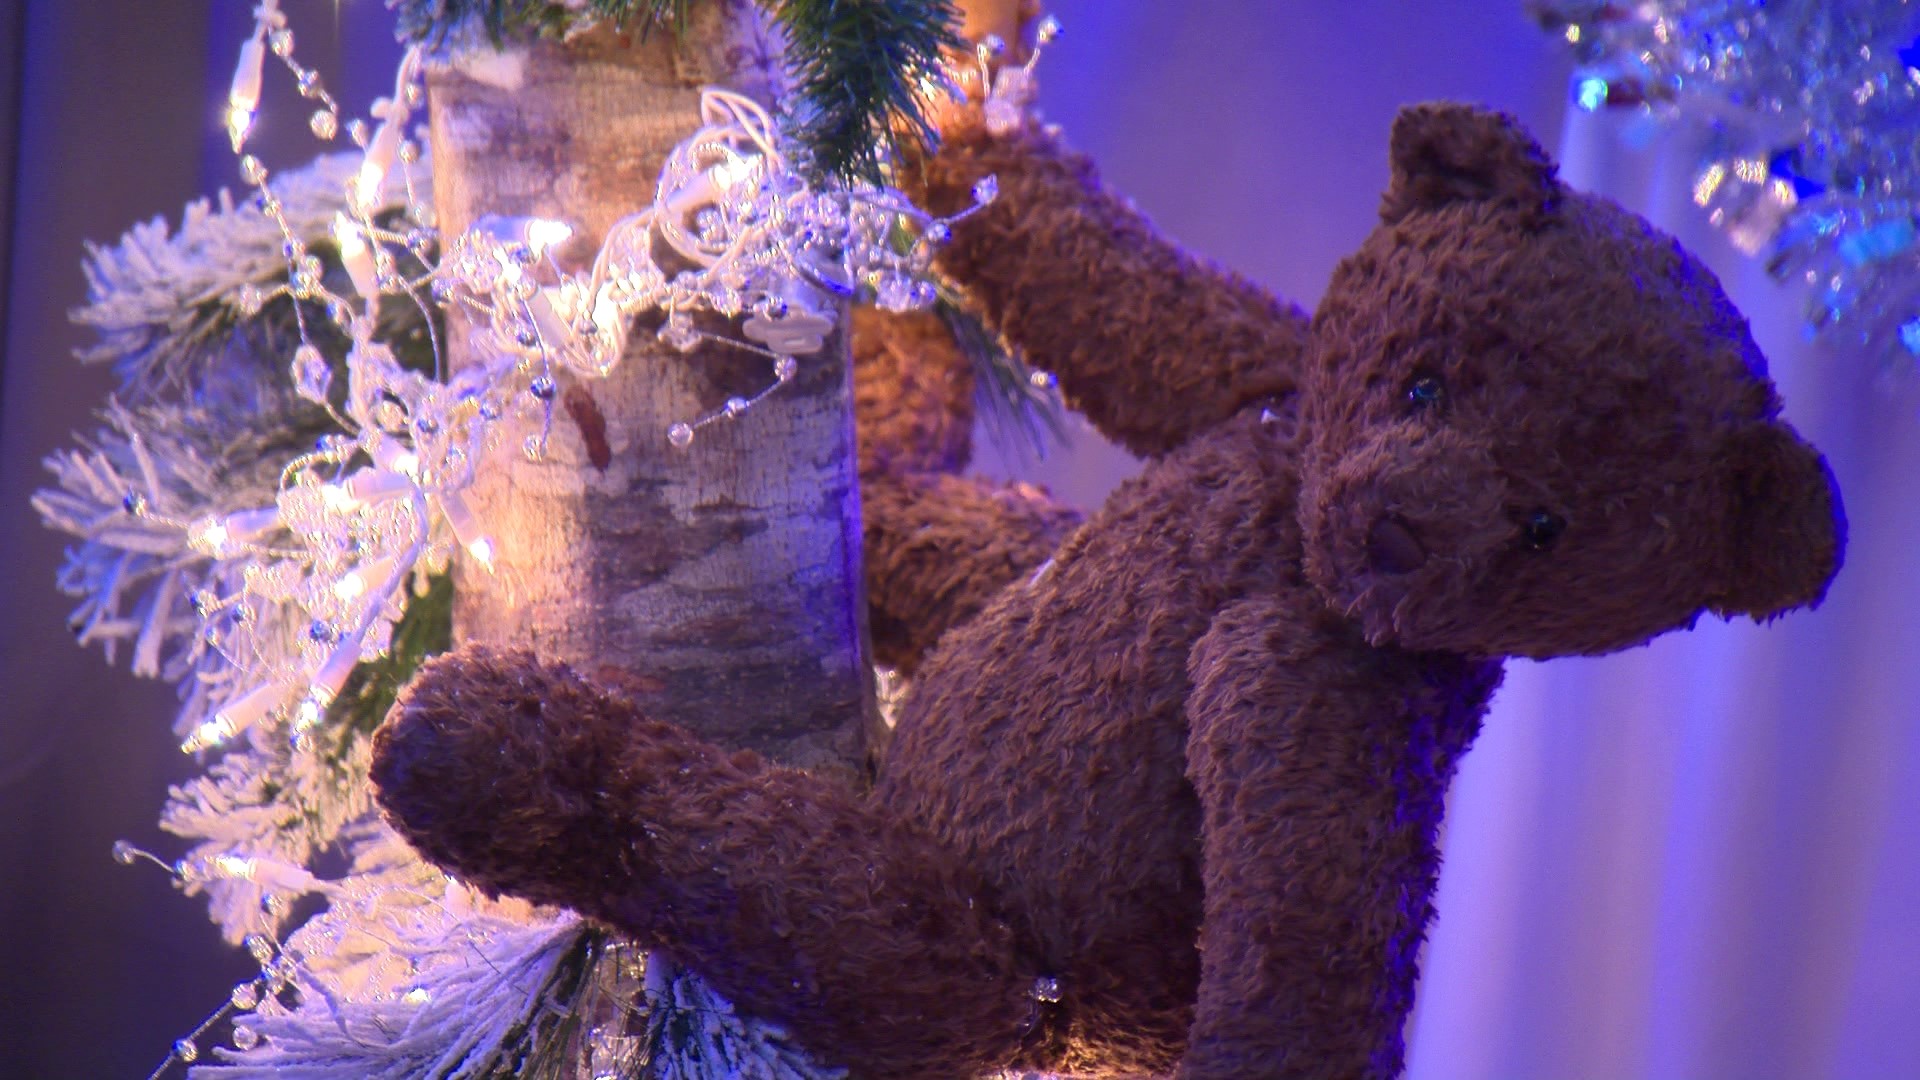 The Teddy Bear Suite at the Fairmont Olympic Hotel is open to visitors through January 3. #k5evening